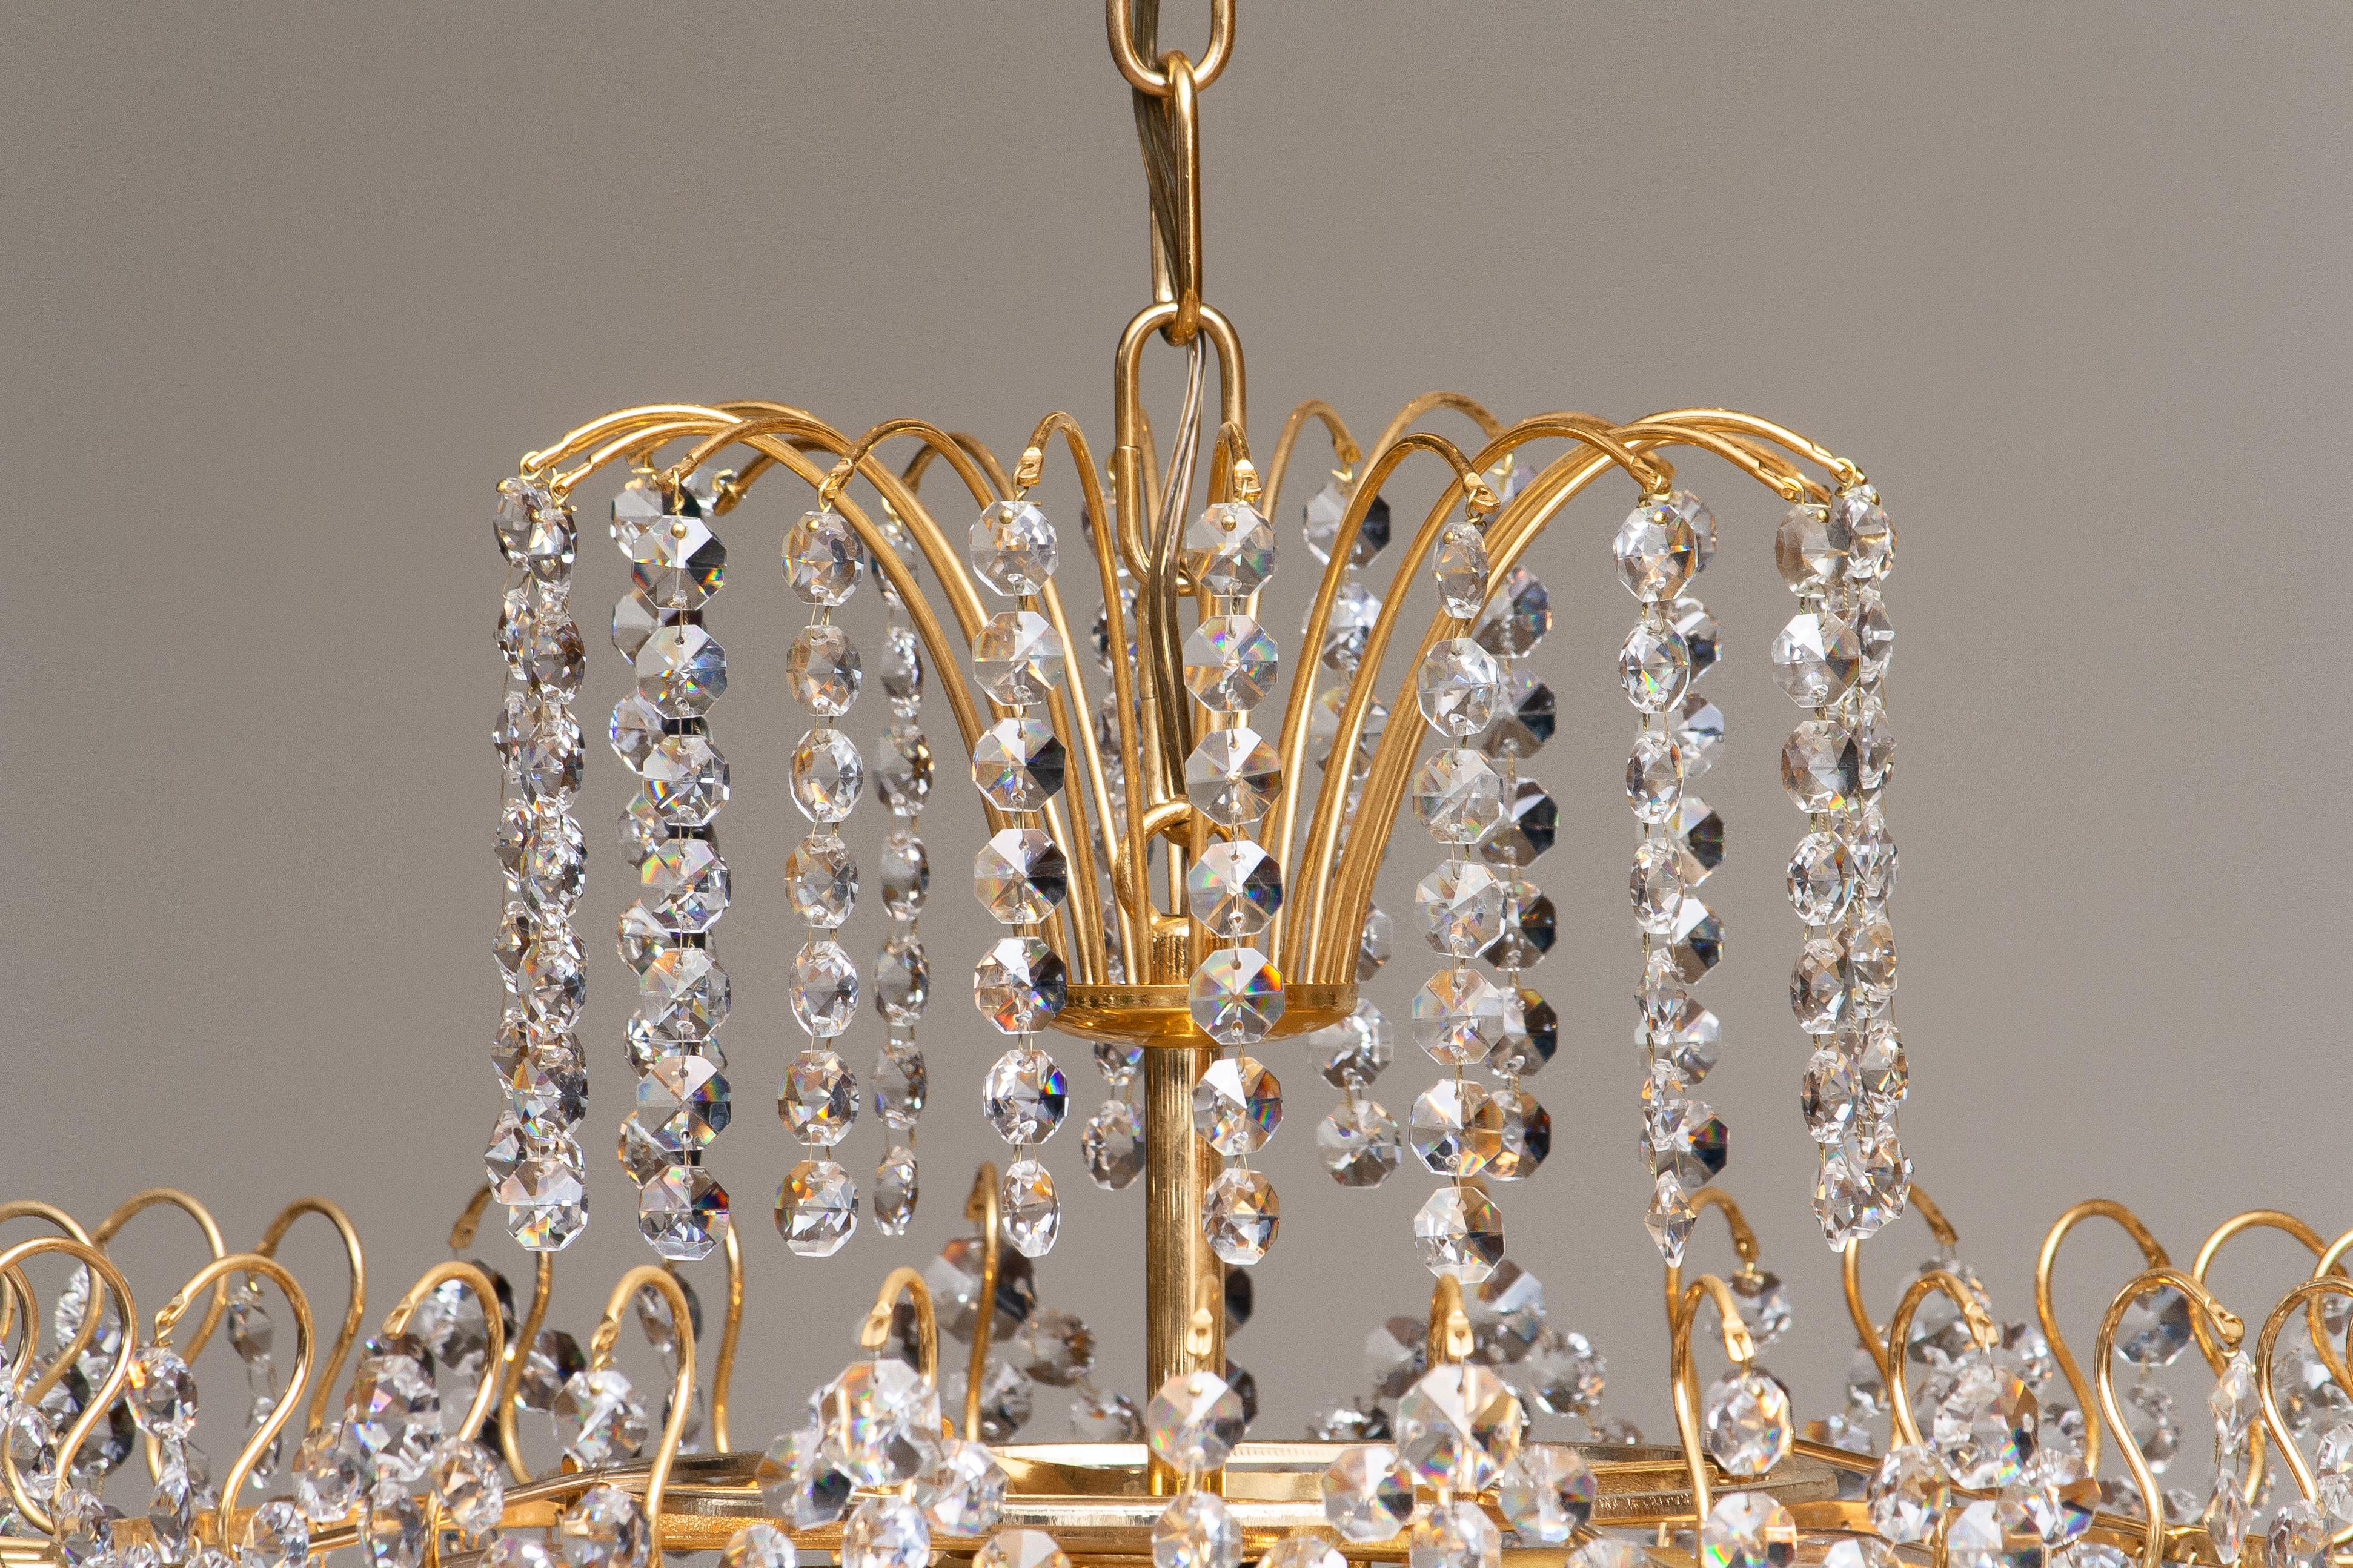 1970s, Gold-Plated and Faceted Crystal Chandelier Attributed to Rejmyre Sweden In Good Condition In Silvolde, Gelderland